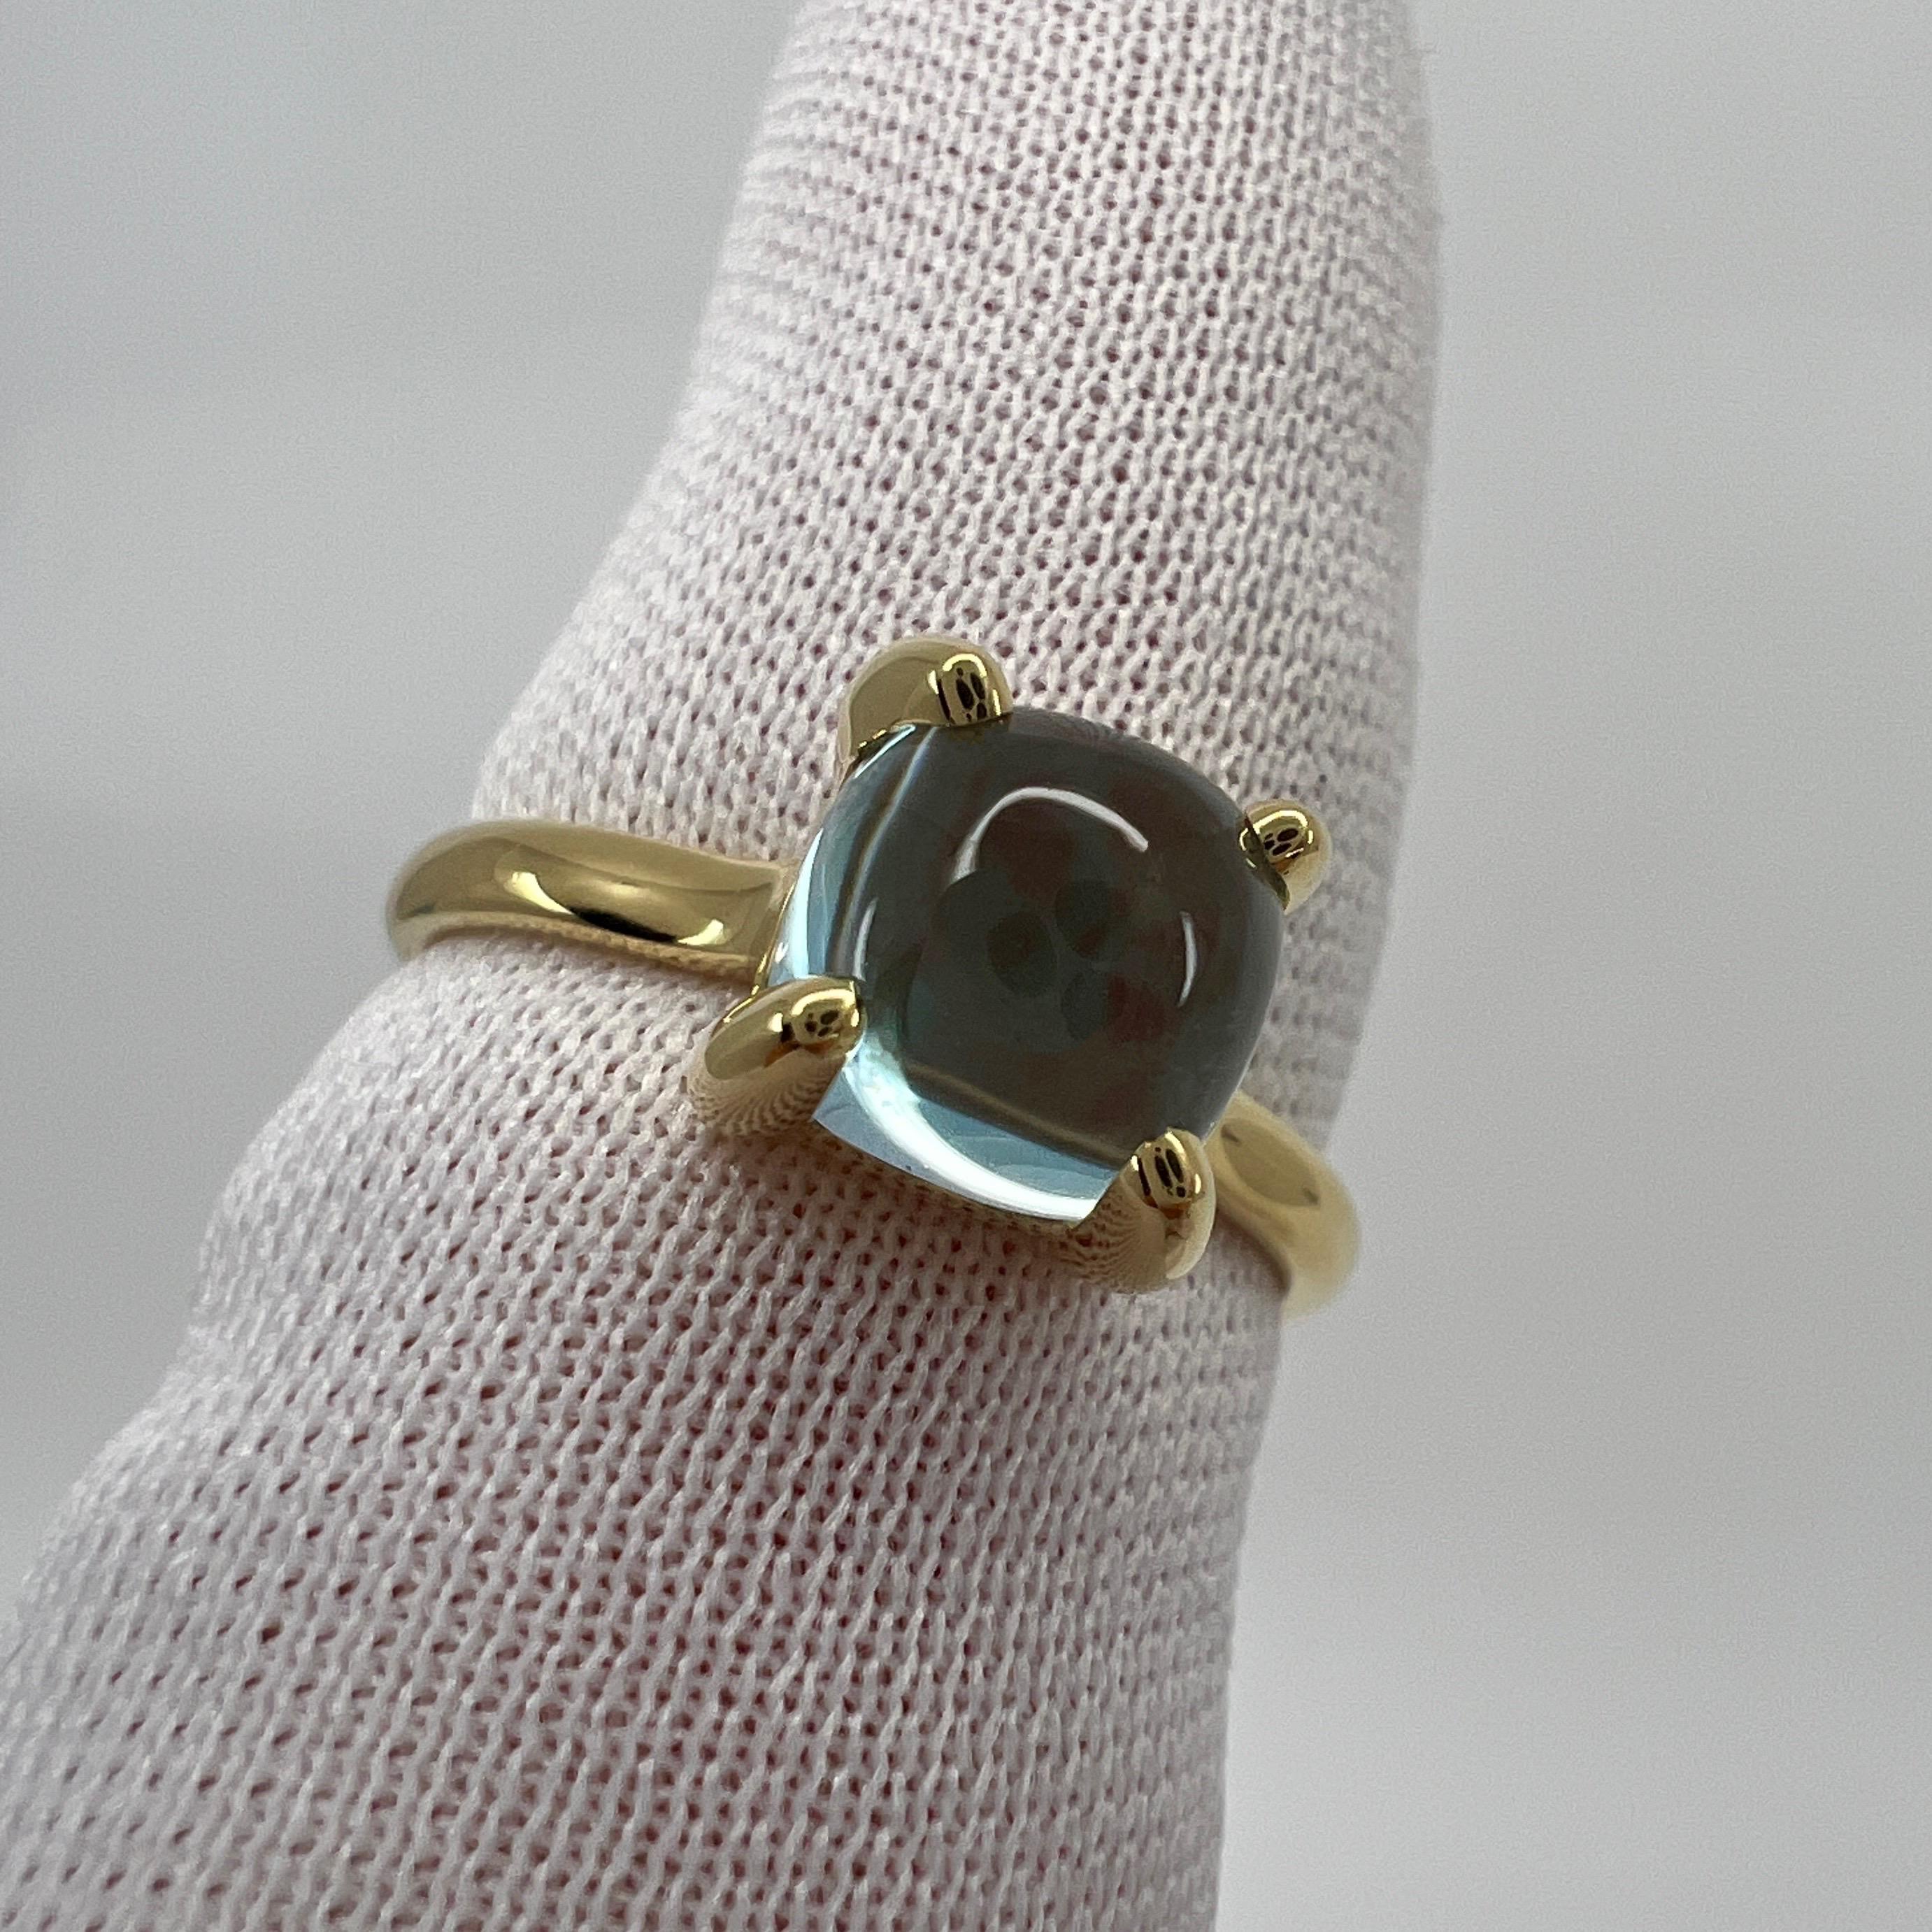 Tiffany & Co. Paloma Picasso Blue Topaz Sugar Stack Loaf 18k Yellow Gold Ring 2